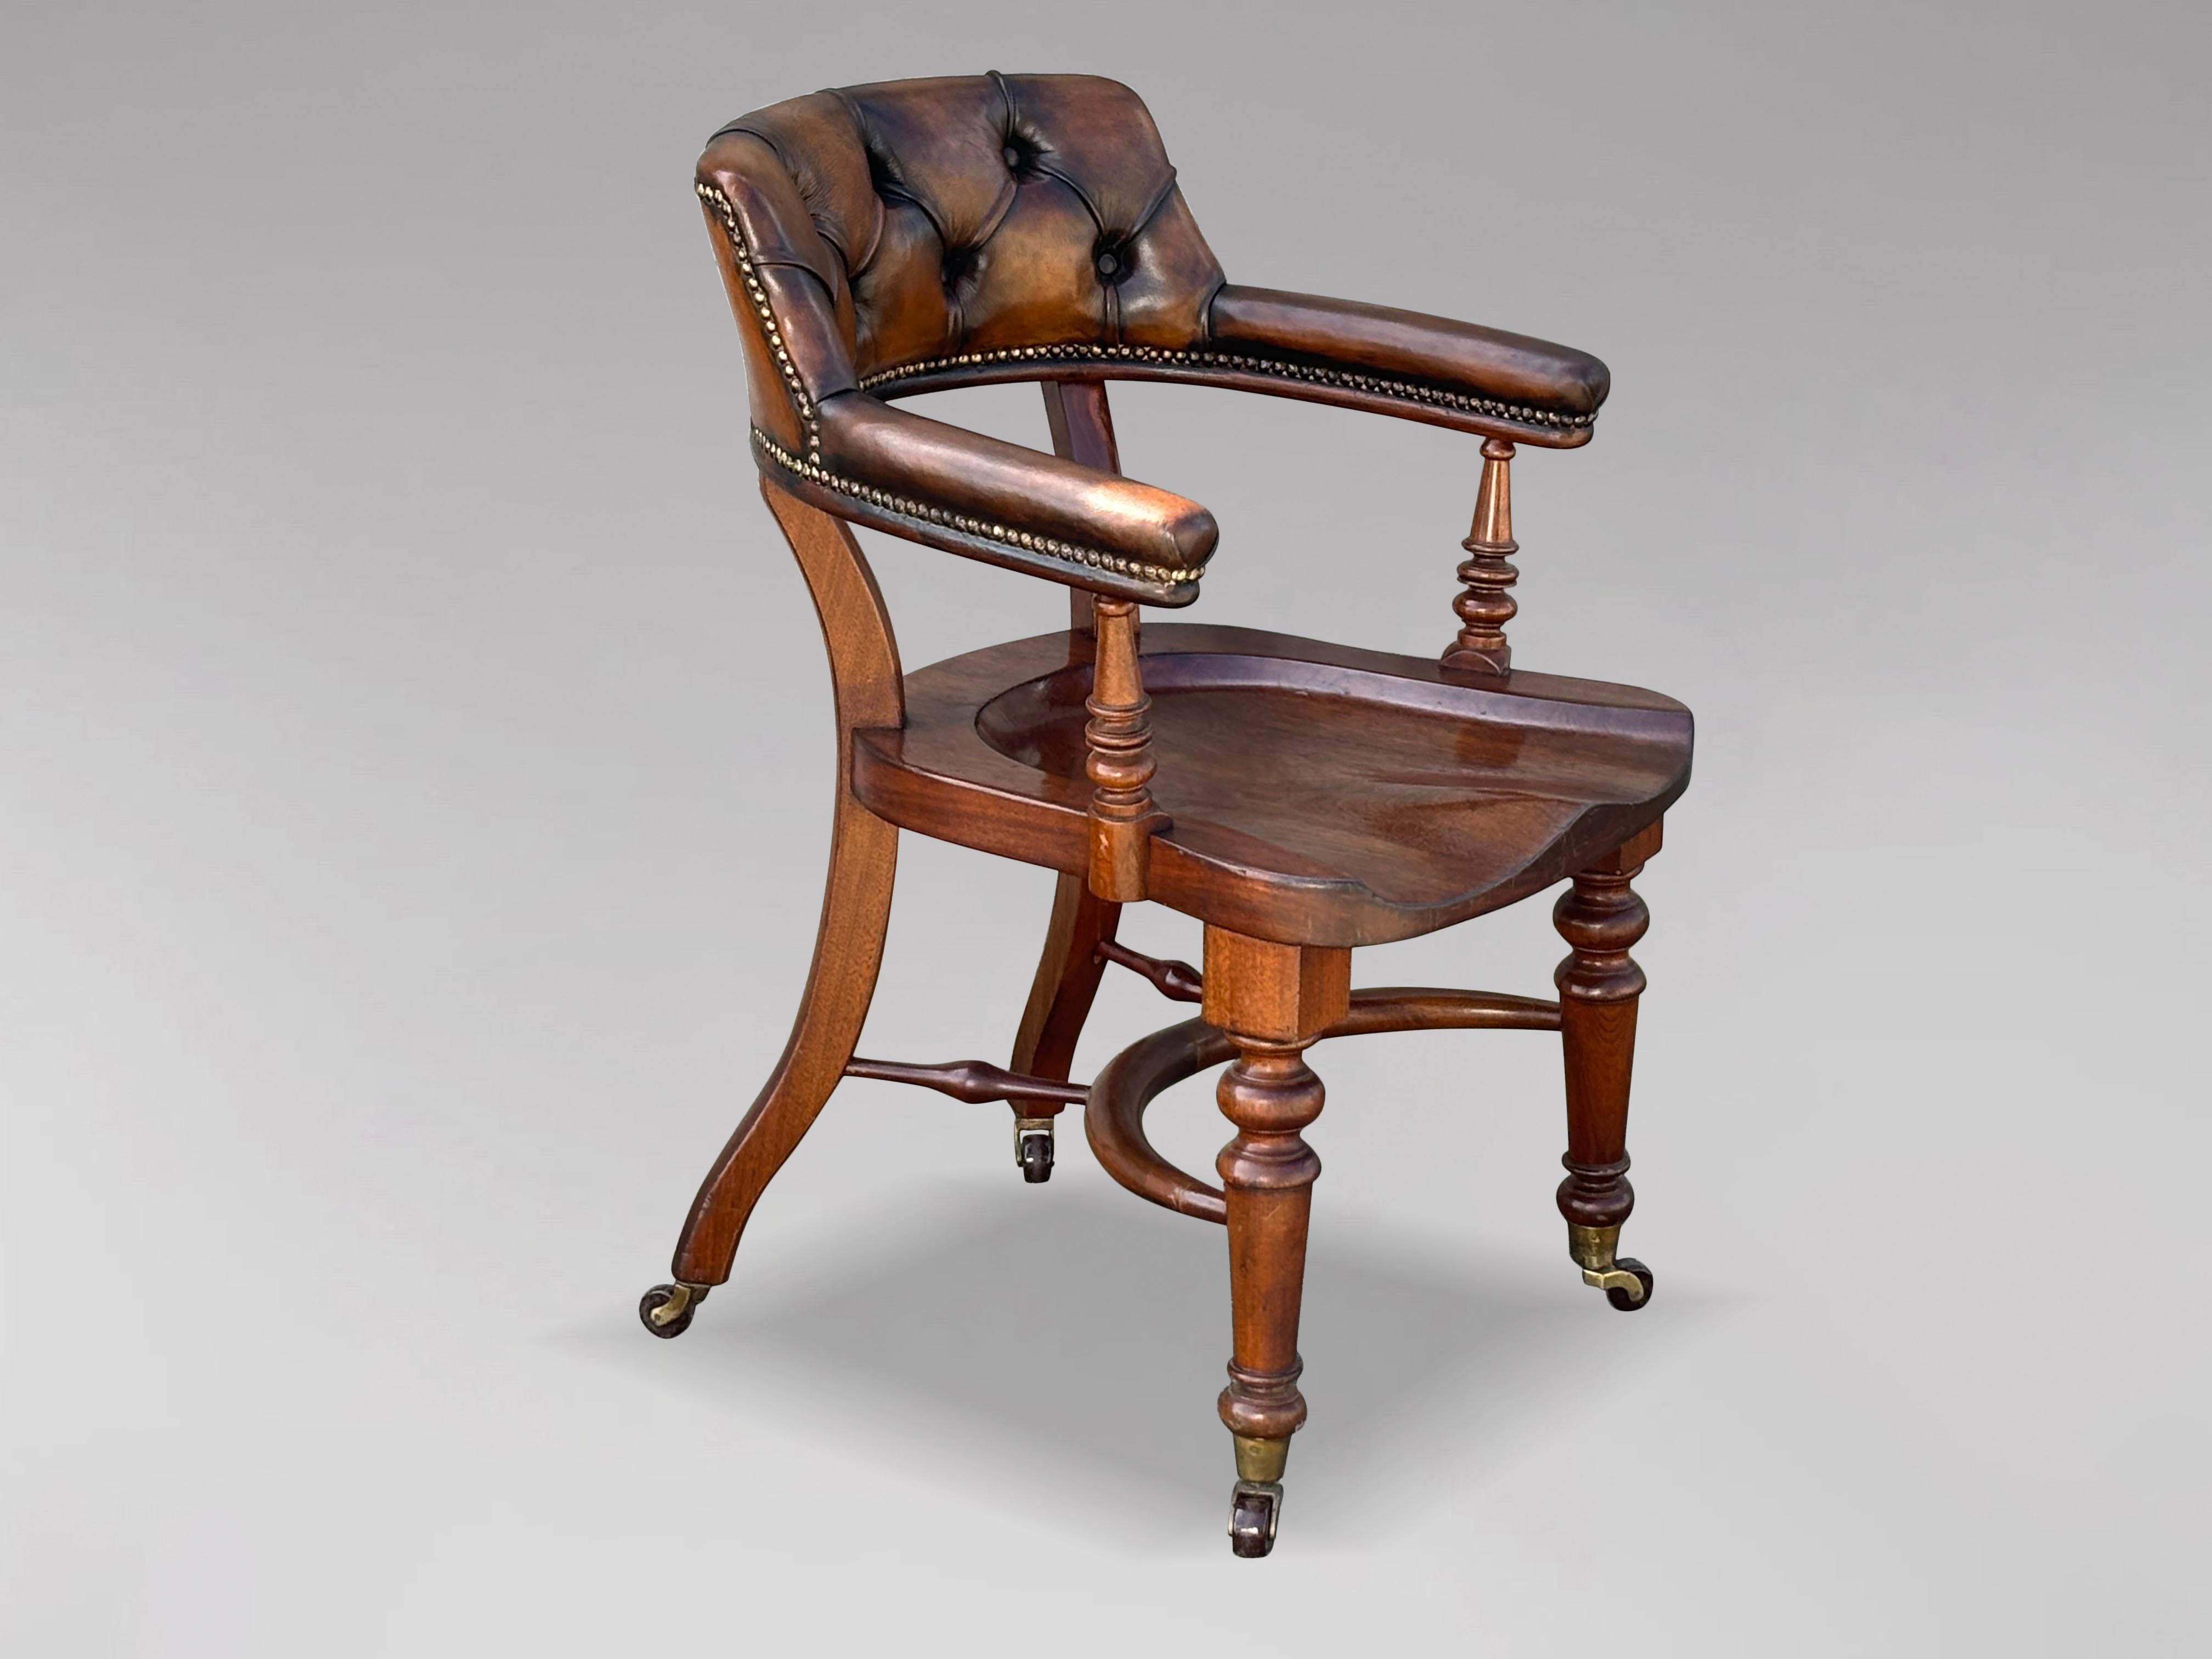 A fine quality 19th century English Victorian period saddle seat desk chair, constructed of solid mahogany with a brown upholstered backrest and armrests, circa 1880. The mahogany office chair benefits from a curved, deep-buttoned padded backrest,